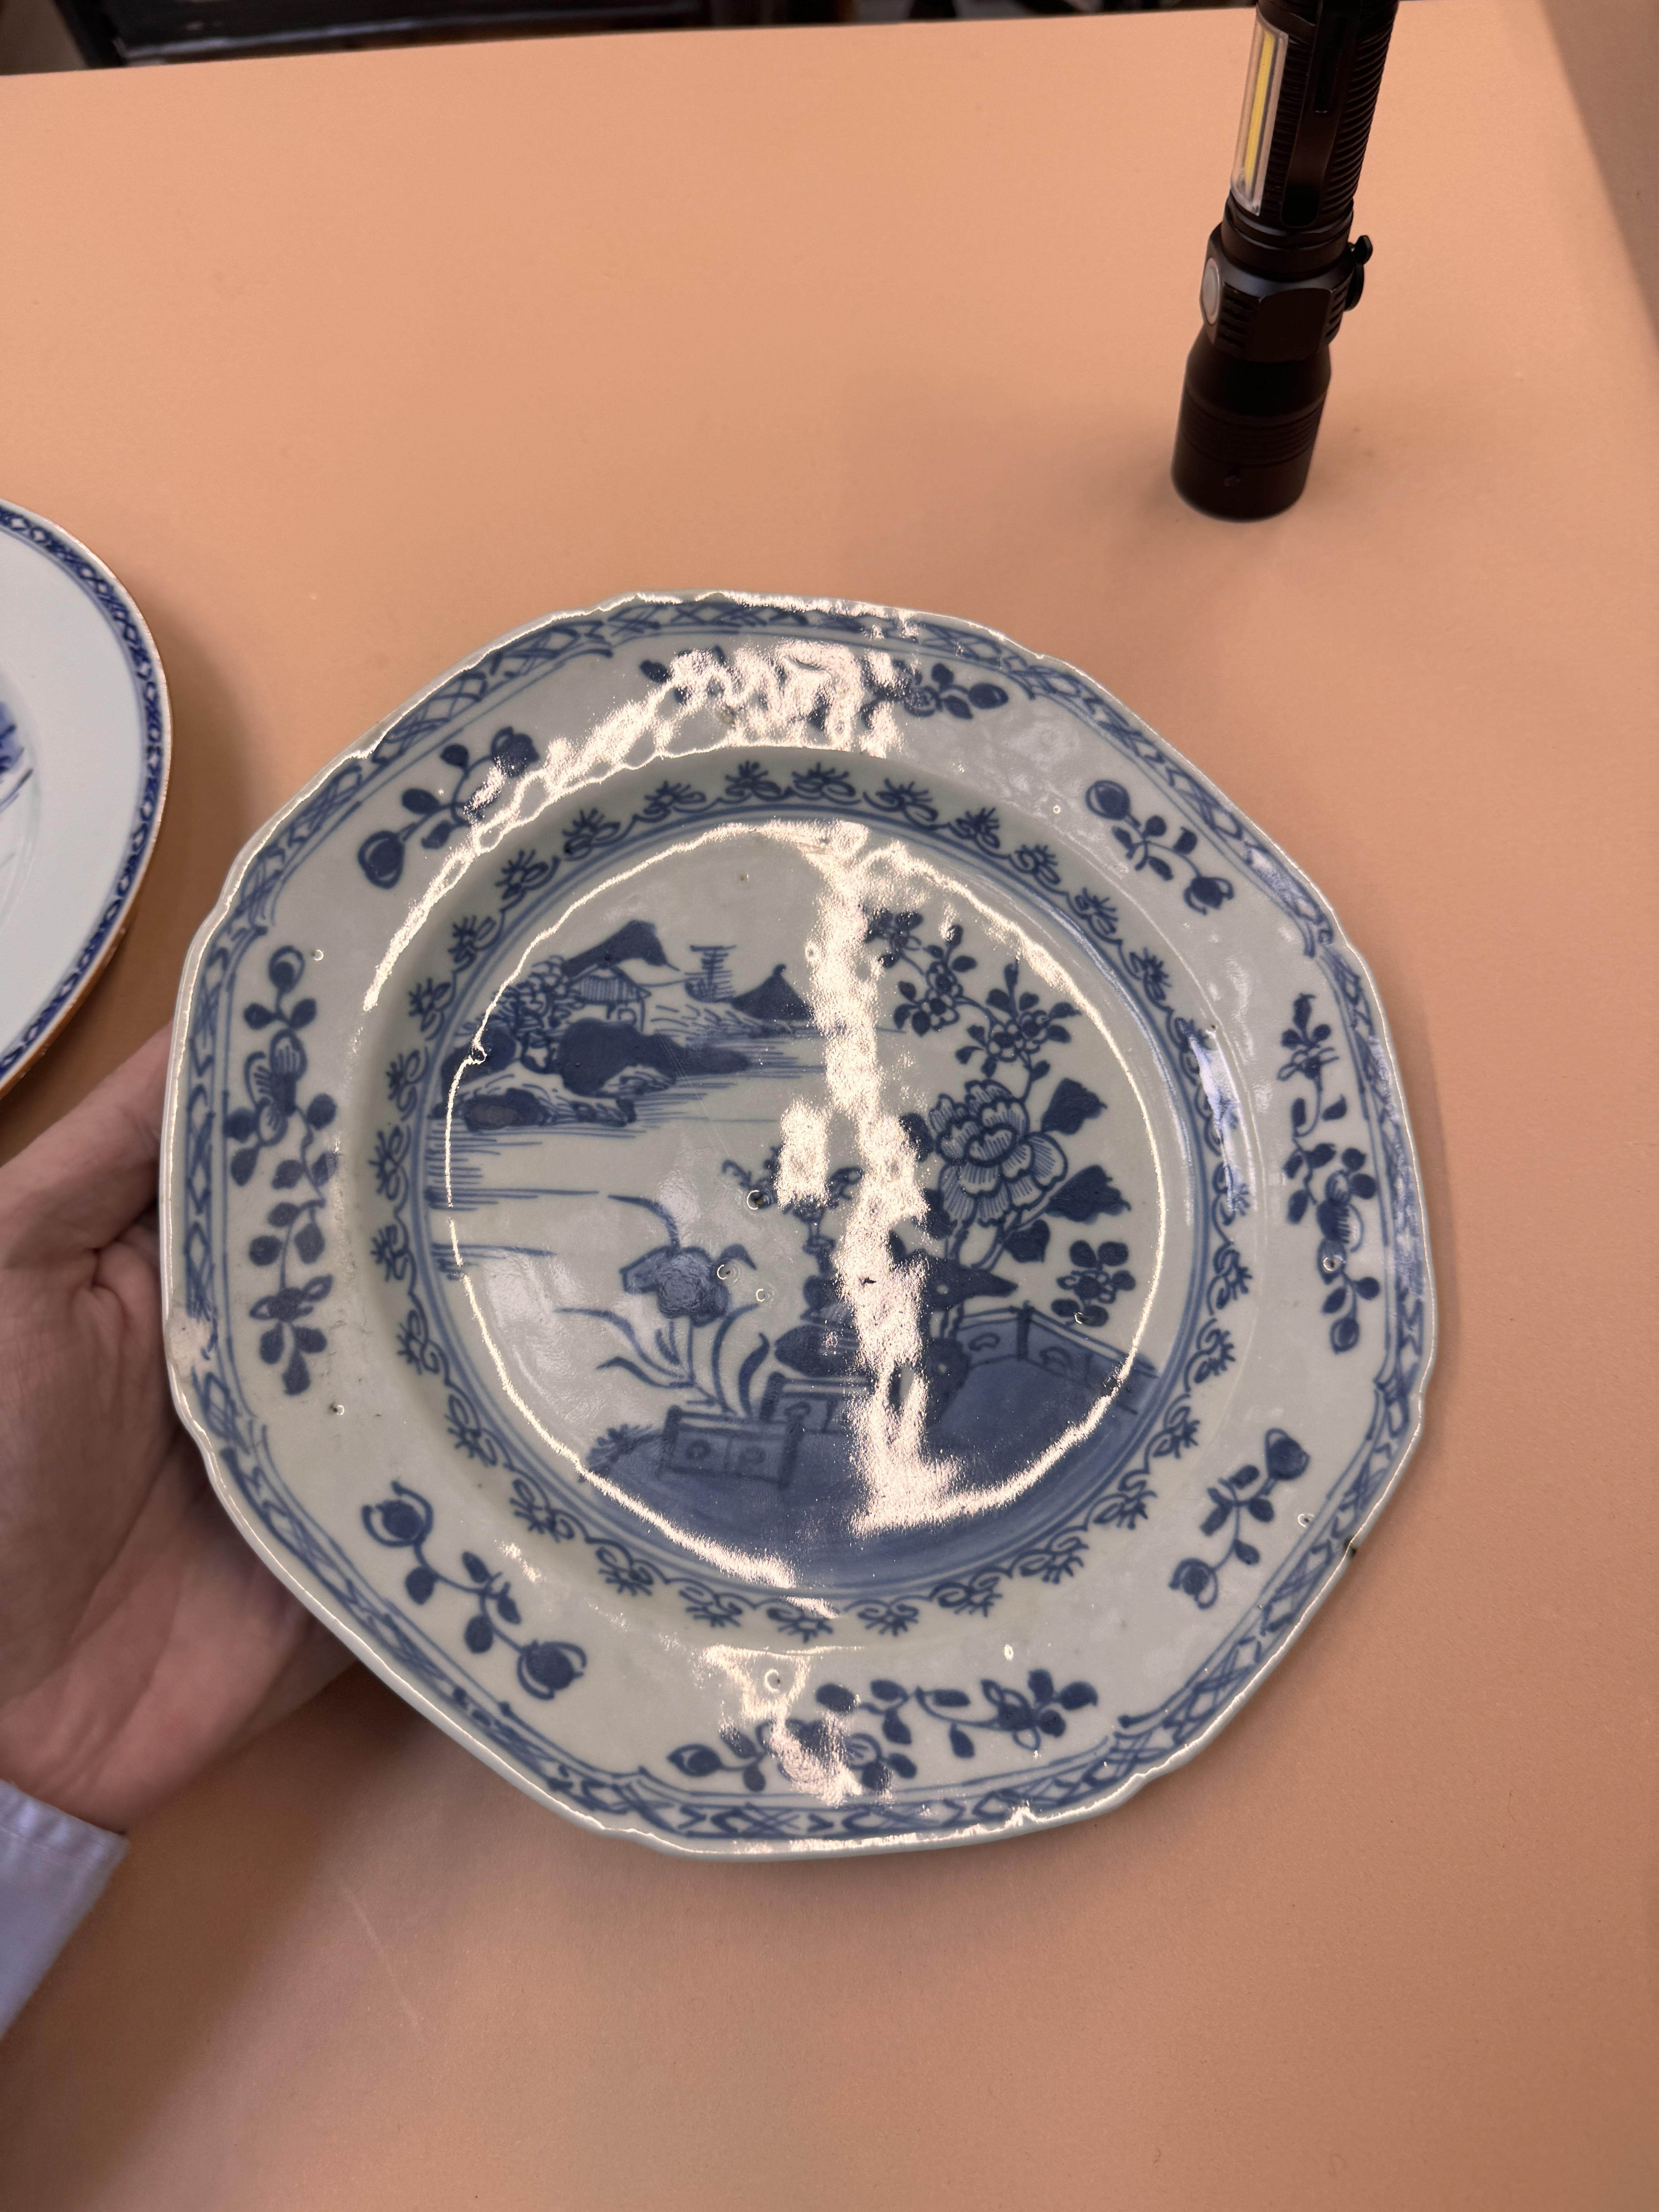 TWO CHINESE EXPORT BLUE AND WHITE DISHES 清十八世紀 外銷青花盤兩件 - Image 11 of 12